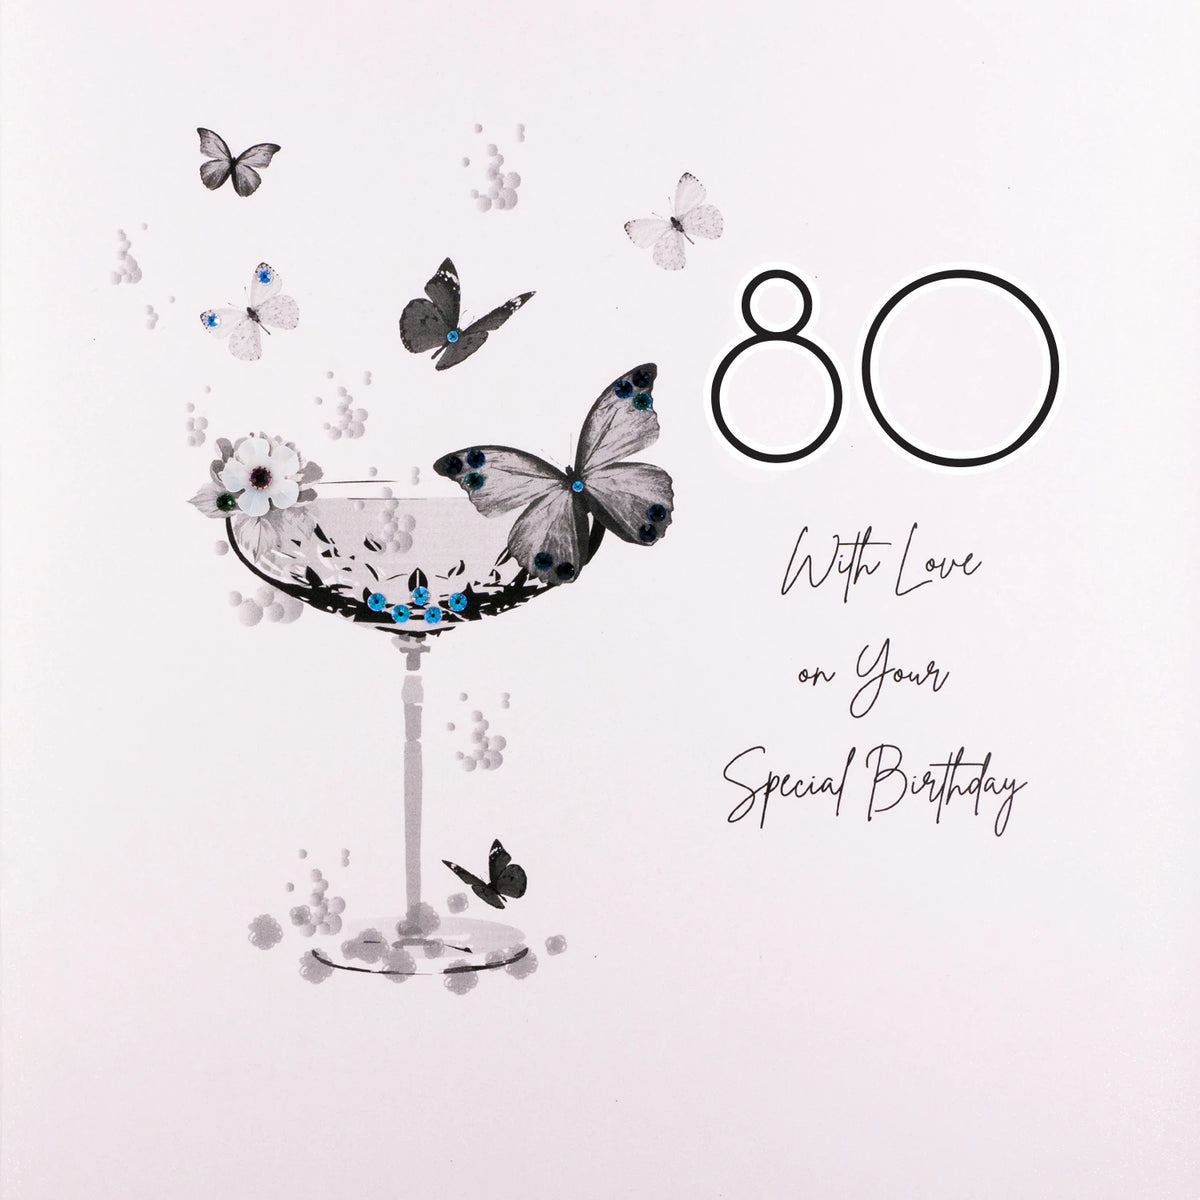 80 With Love On Your Special Birthday